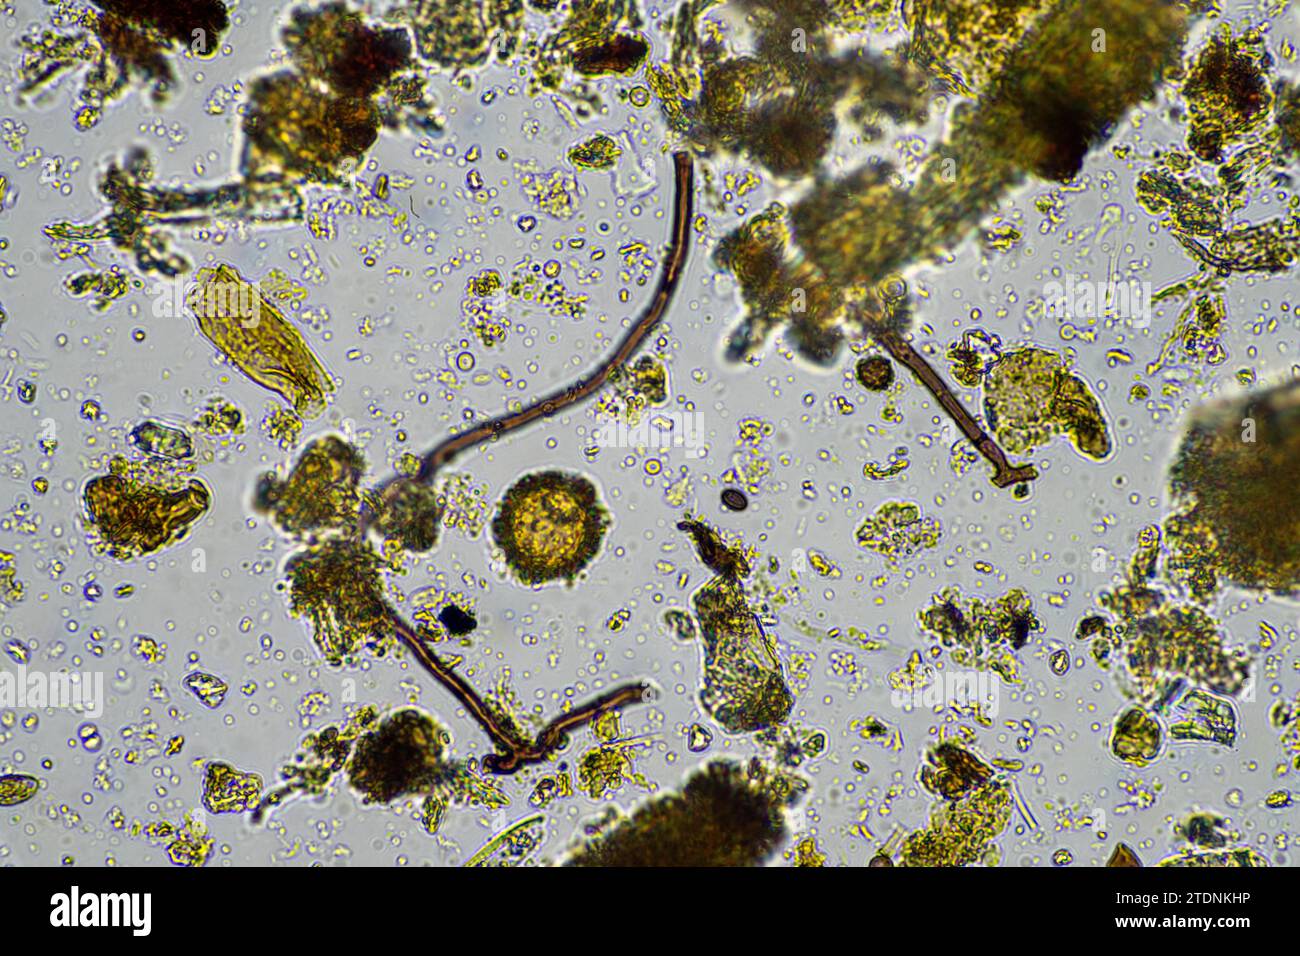 soil microorganism under the microscope recycling nutrients in a compost on a regenerative agriculture farm in australia, showing amoeba, fungi, funga Stock Photo